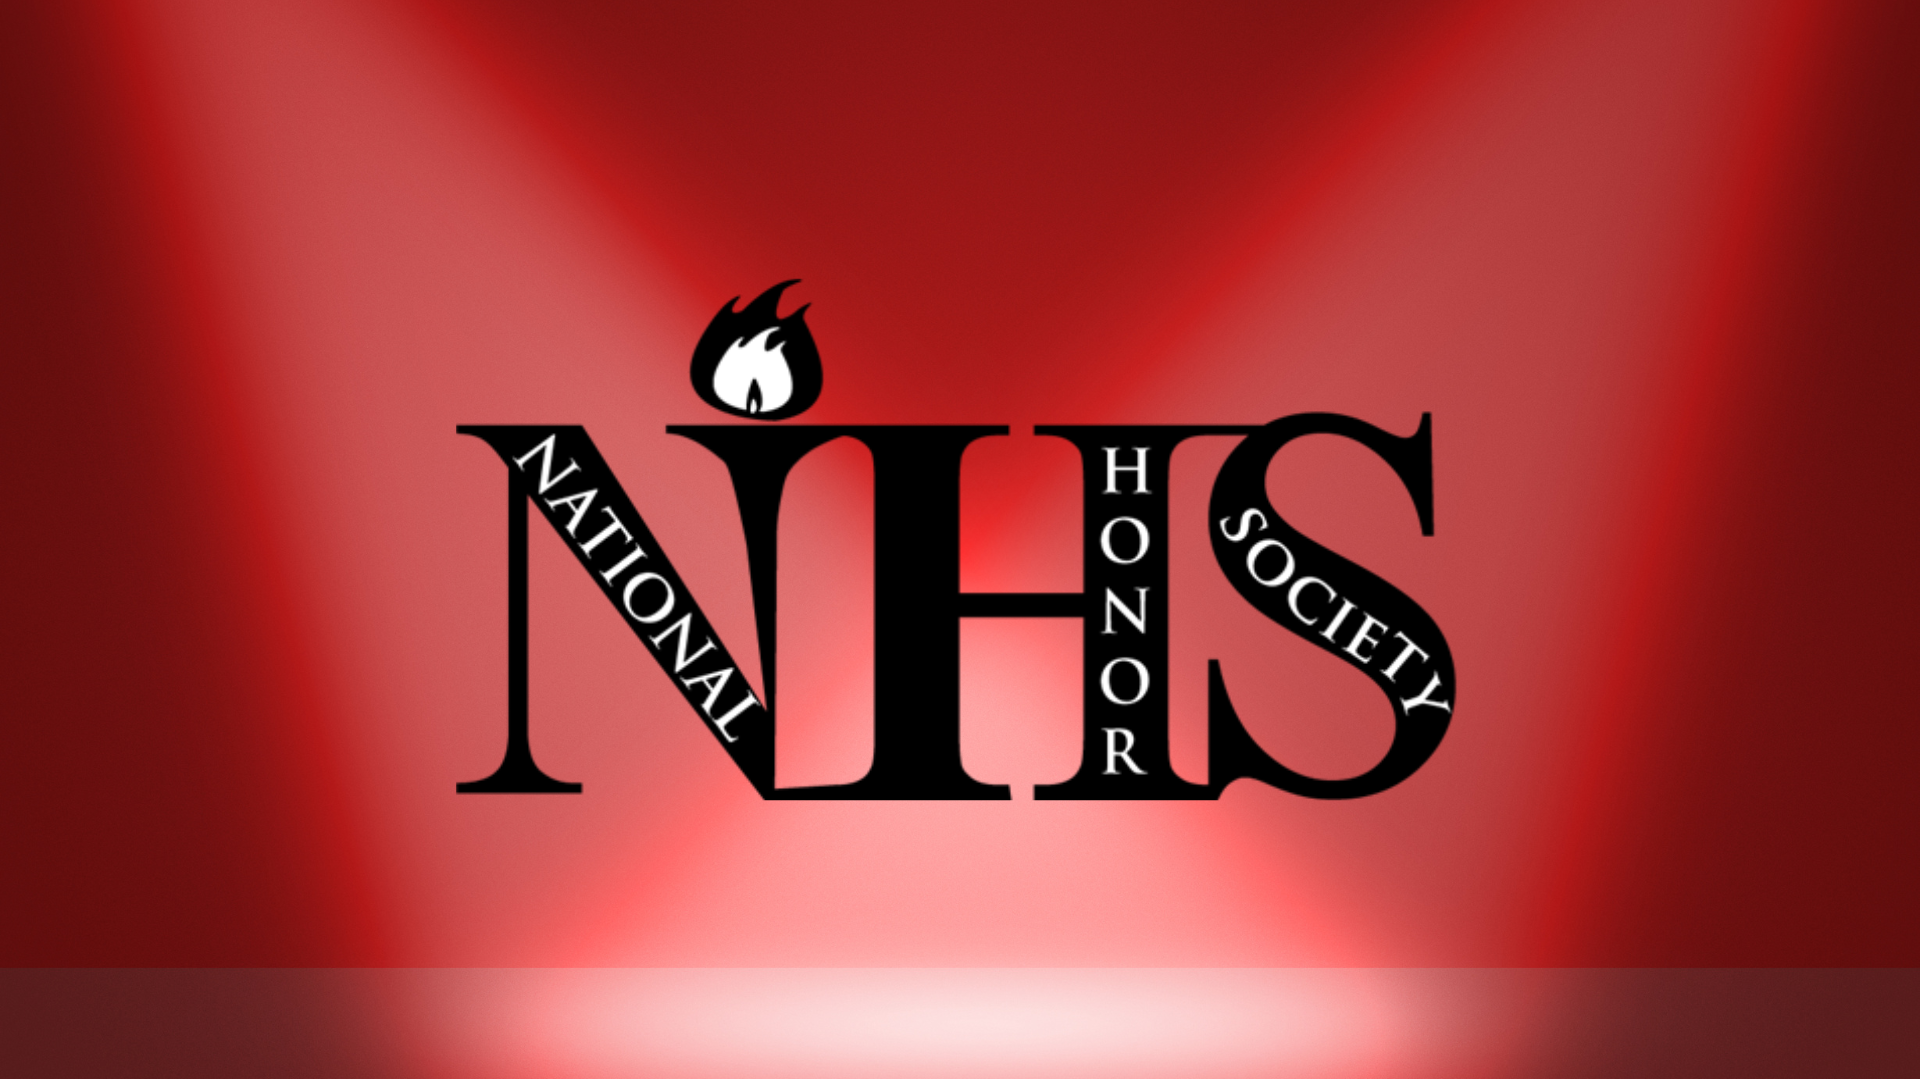 a national honor society logo on a red background